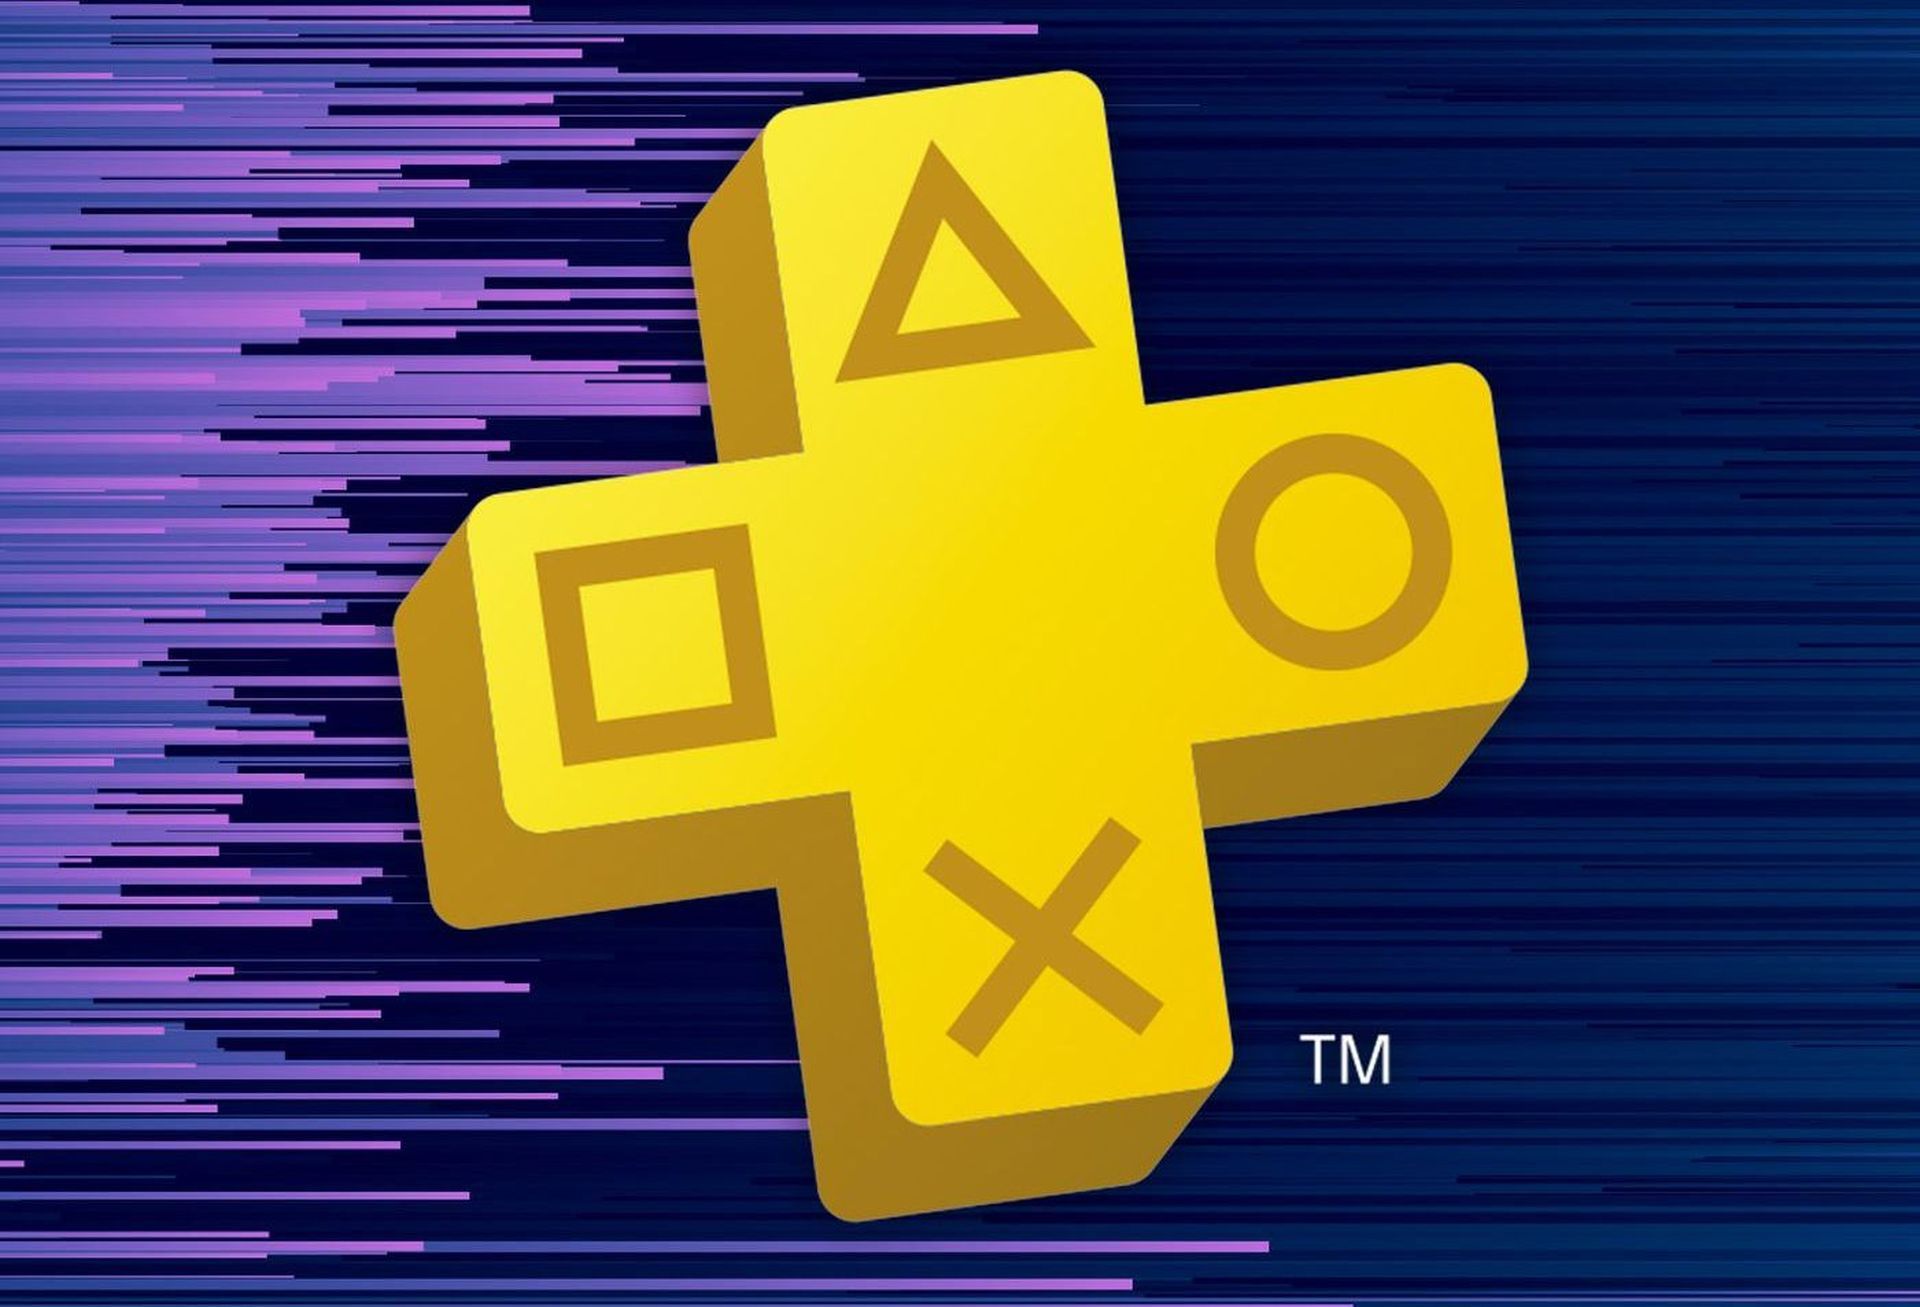 Today, we are covering what is PS Plus cloud streaming, and answer: "Does PlayStation have cloud streaming?", "How much cloud storage does PS Plus give?"